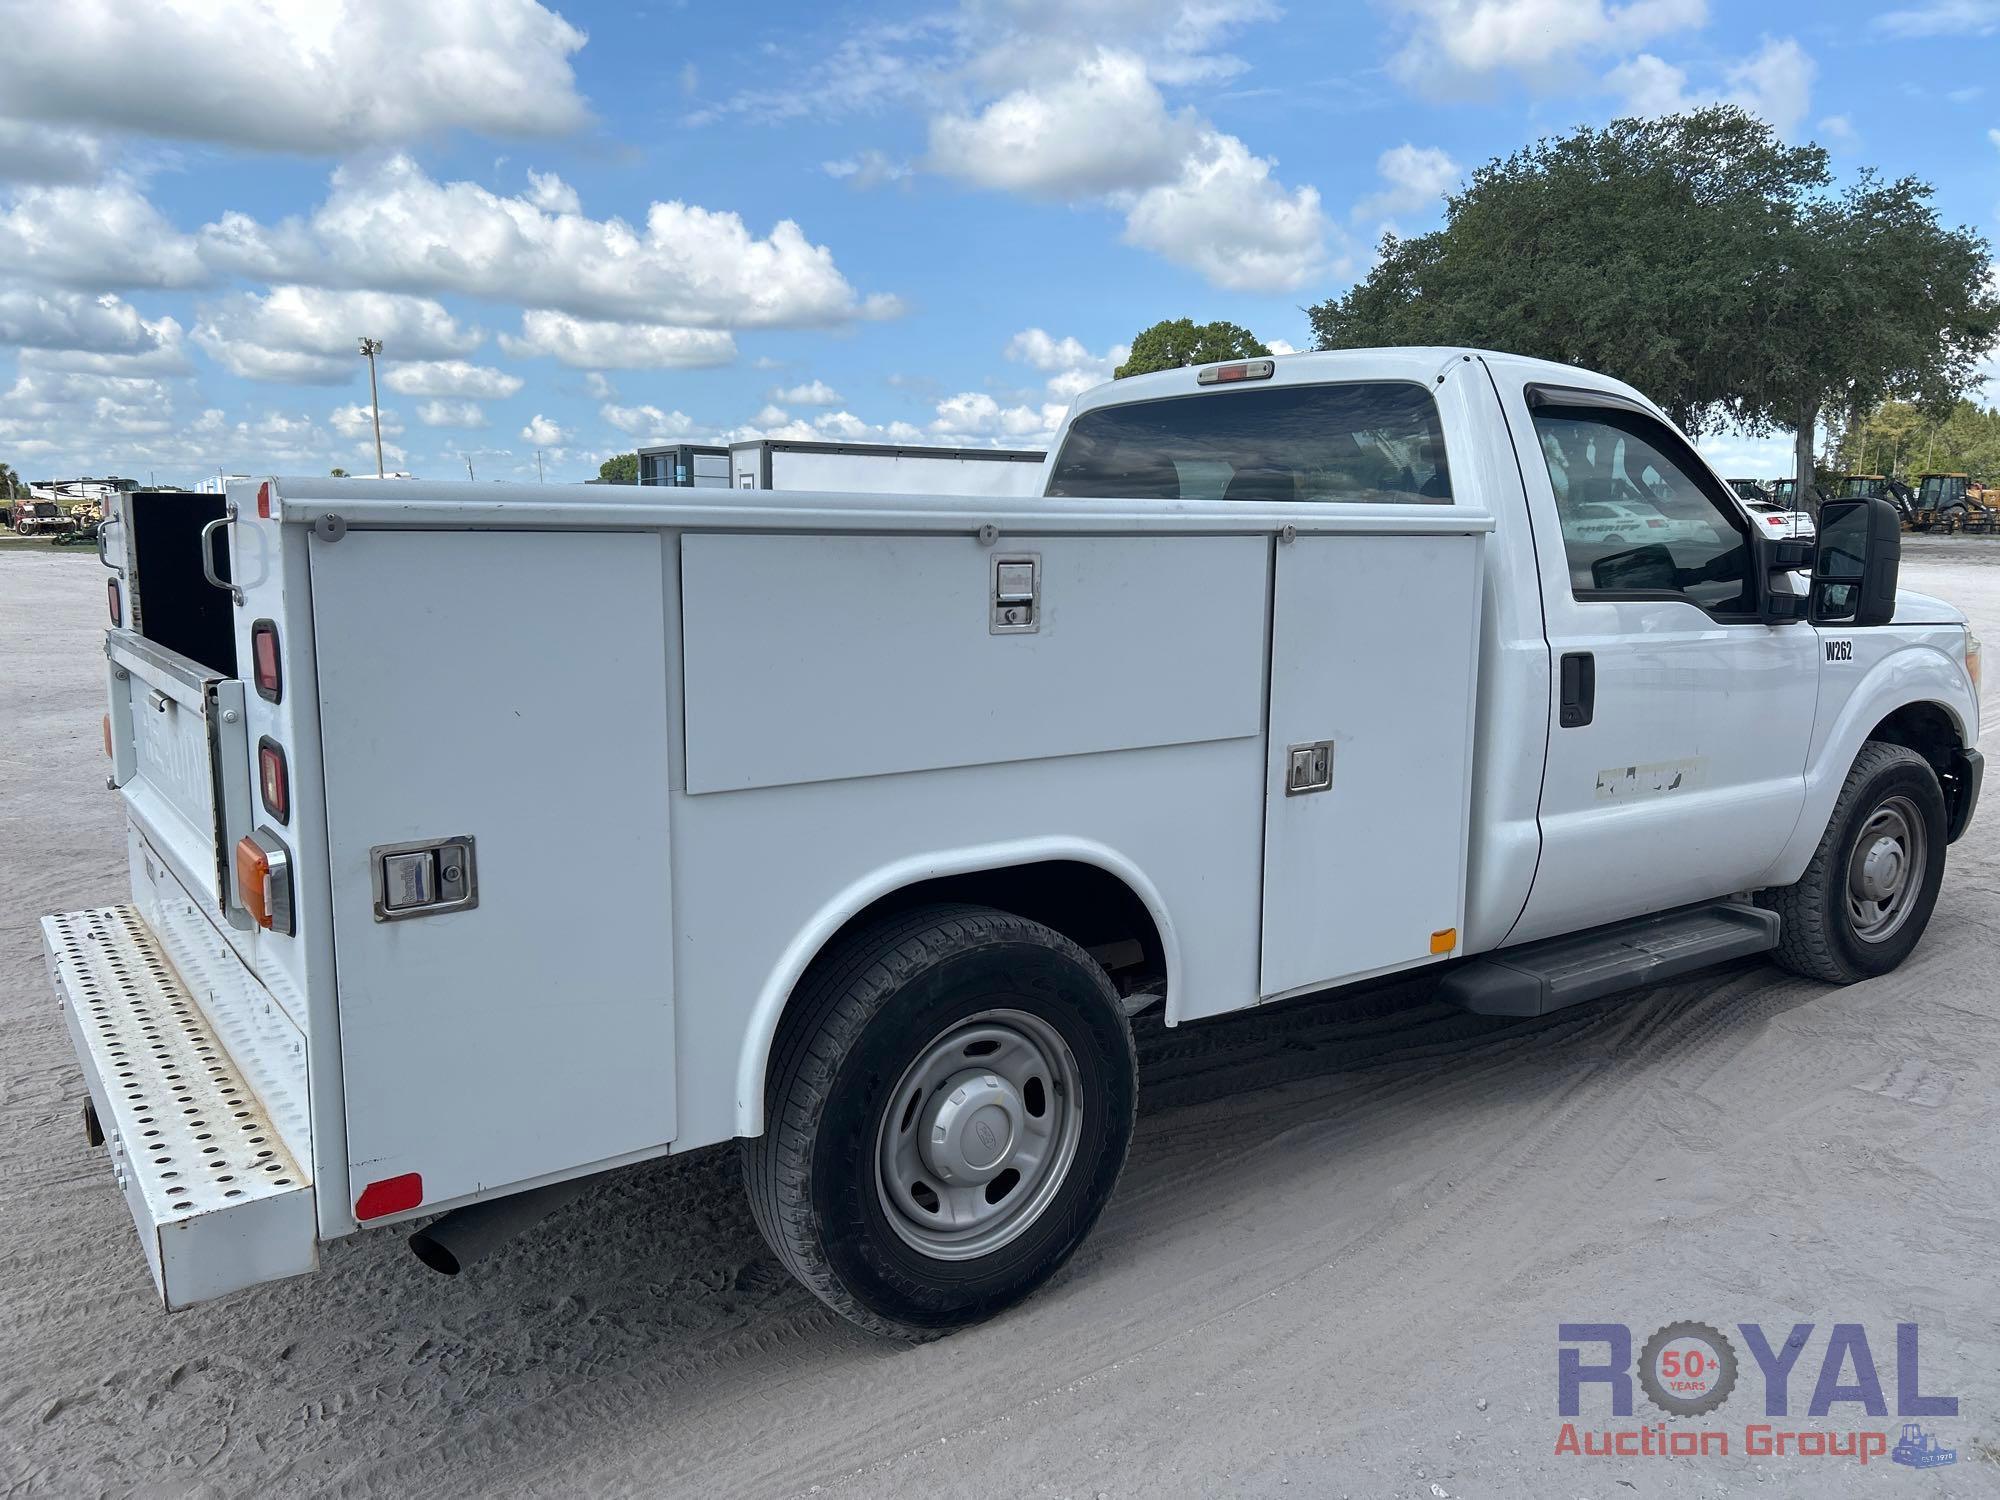 2012 Ford F250 Service Truck